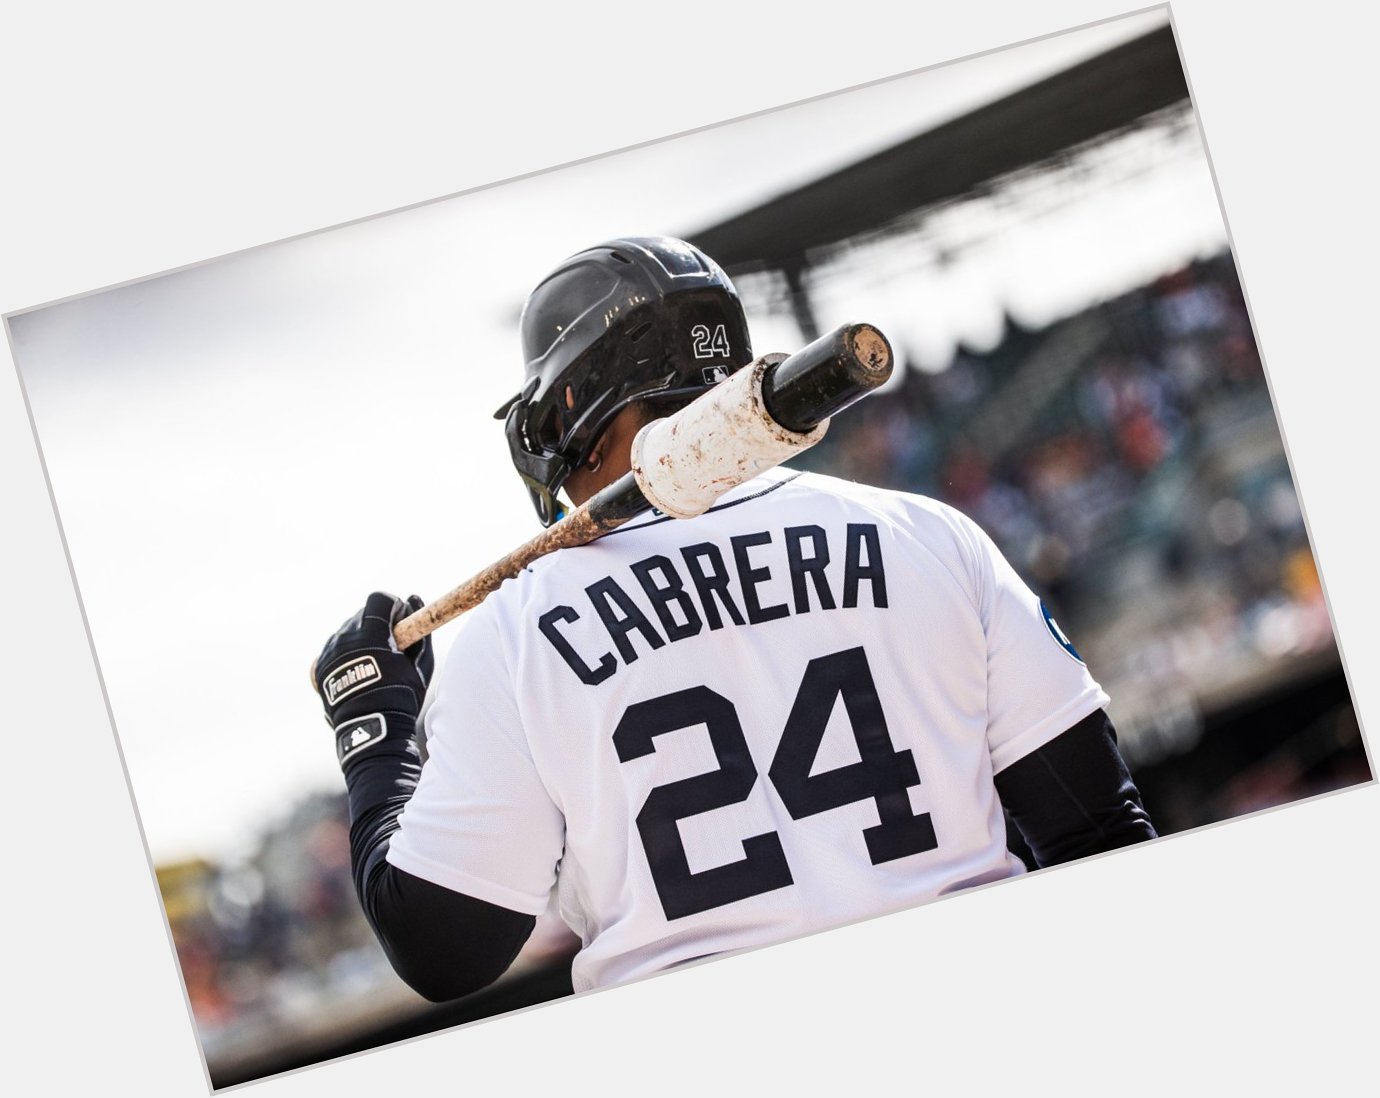 Happy Birthday to Miguel Cabrera! He is currently 6  hits away from 3,000 career hits. 